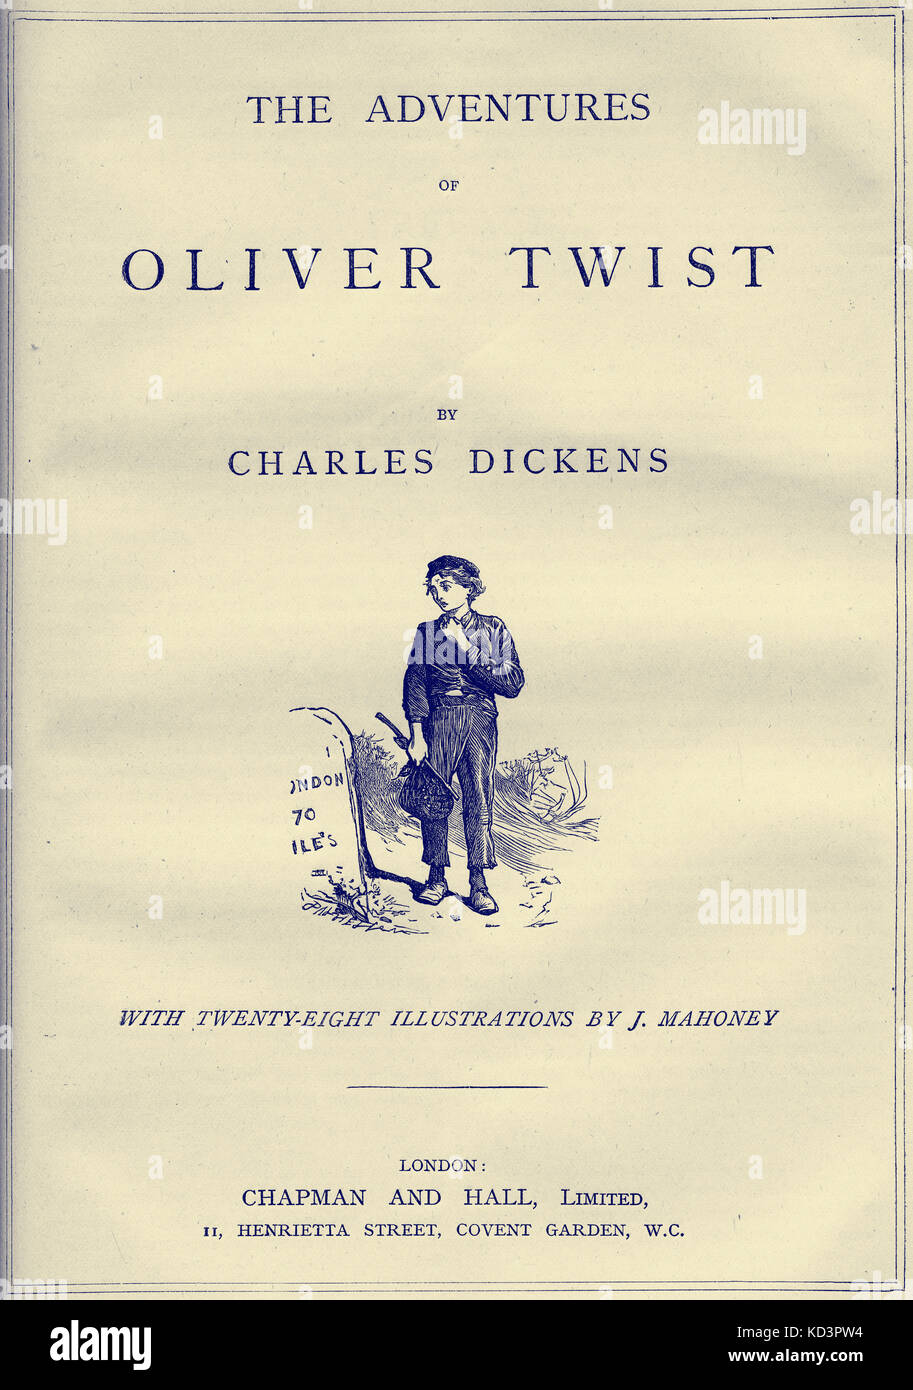 Oliver Twist by Charles Dickens Title page -   English novelist, 7 February 1812 - 9 June 1870. Illustration by James Mahoney 1810–1879 : Stock Photo